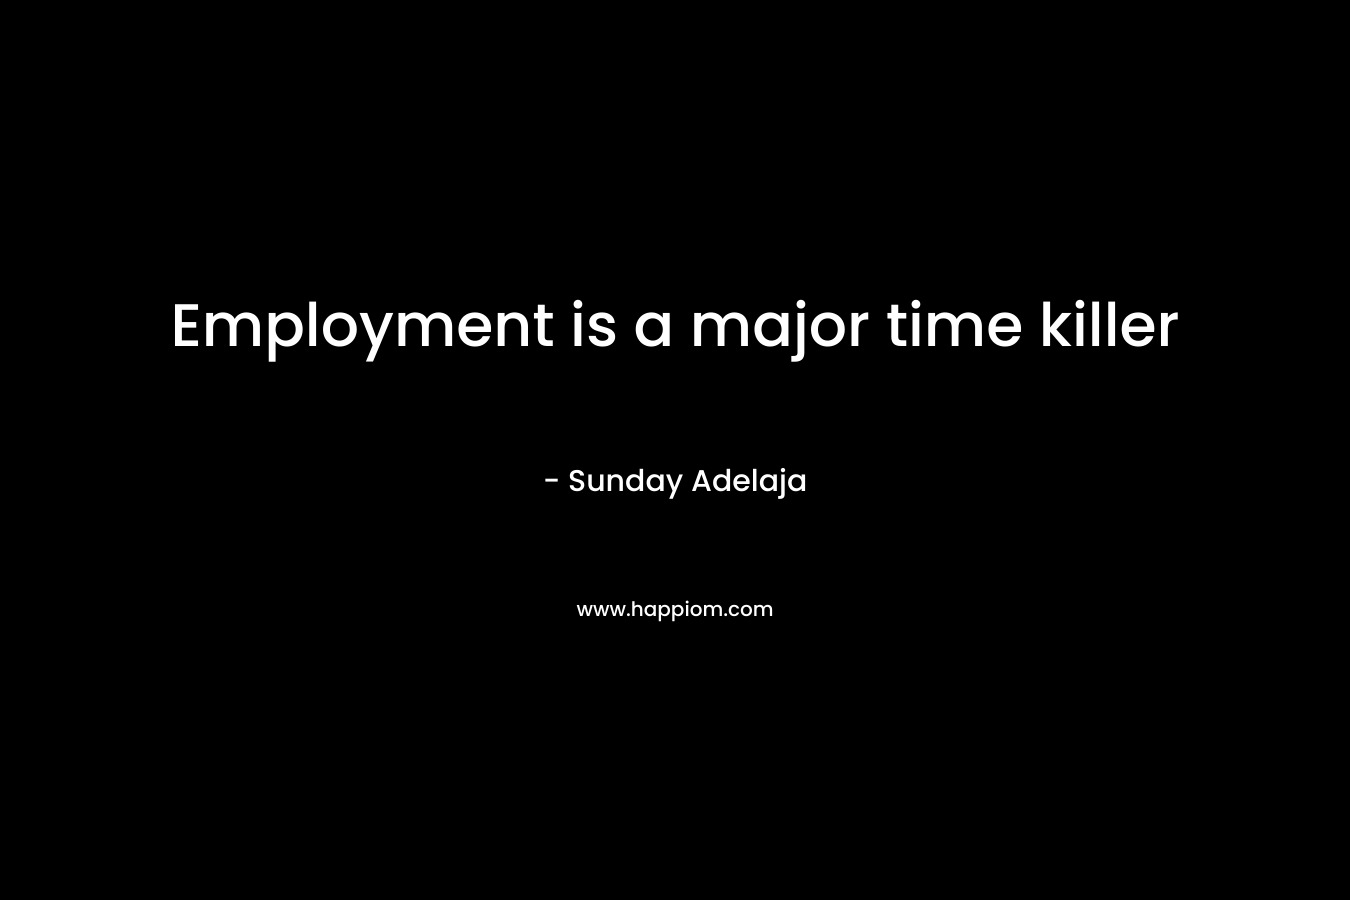 Employment is a major time killer